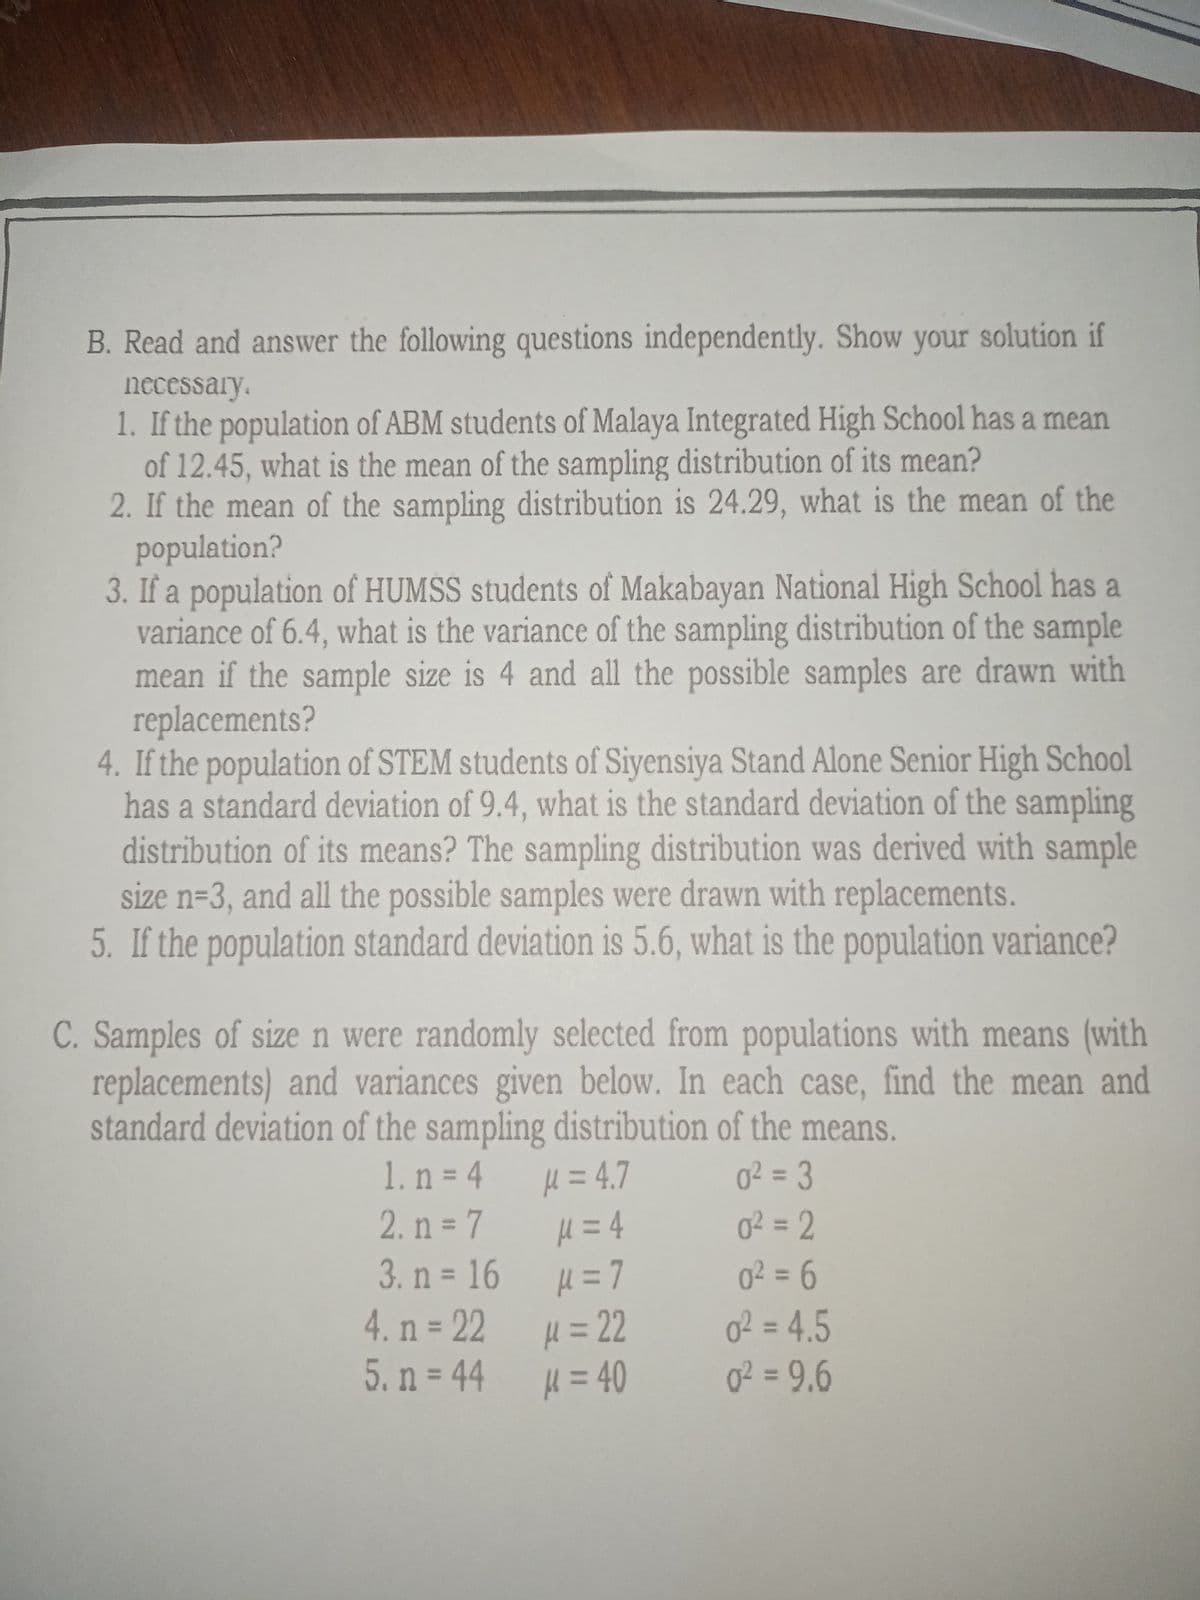 B. Read and answer the following questions independently. Show your solution if
necessary.
1. If the population of ABM students of Malaya Integrated High School has a mean
of 12.45, what is the mean of the sampling distribution of its mean?
2. If the mean of the sampling distribution is 24.29, what is the mean of the
population?
3. If a population of HUMSS students of Makabayan National High School has a
variance of 6.4, what is the variance of the sampling distribution of the sample
mean if the sample size is 4 and all the possible samples are drawn with
replacements?
4. If the population of STEM students of Siyensiya Stand Alone Senior High School
has a standard deviation of 9.4, what is the standard deviation of the sampling
distribution of its means? The sampling distribution was derived with sample
size n=3, and all the possible samples were drawn with replacements.
5. If the population standard deviation is 5.6, what is the population variance?
C. Samples of size n were randomly selected from populations with means (with
replacements) and variances given below. In each case, find the mean and
standard deviation of the sampling distribution of the means.
H = 4.7
H = 4
H = 7
1. n = 4
2. n = 7
o² = 3
%3D
%3D
0² = 2
%3D
3. n = 16
0² = 6
%3D
4. n 22
H%=D22
02 = 4.5
%3D
5. n = 44 = 40
g? = 9,6
%3D
%3D
